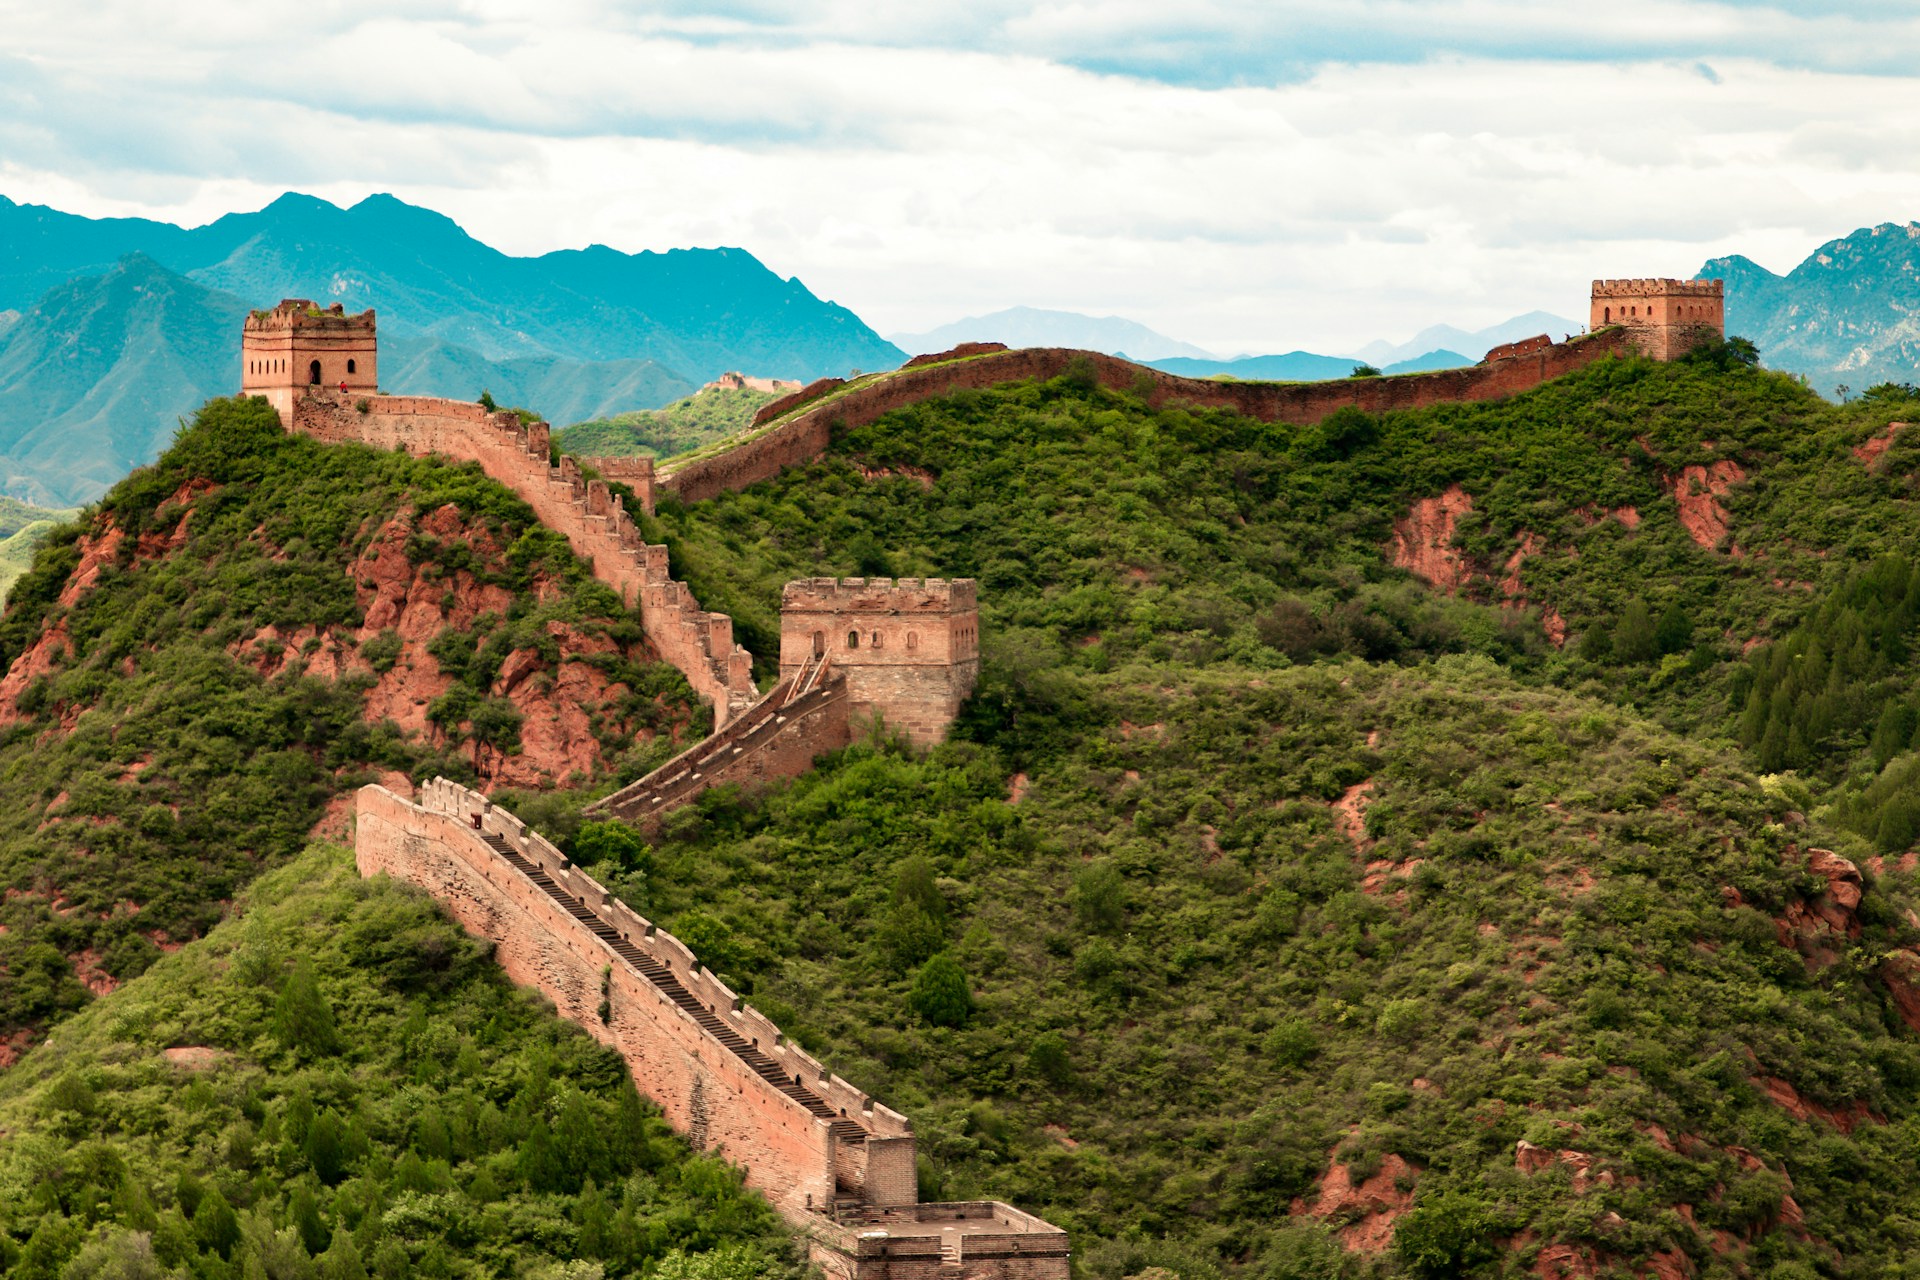 Visiting the Great Wall